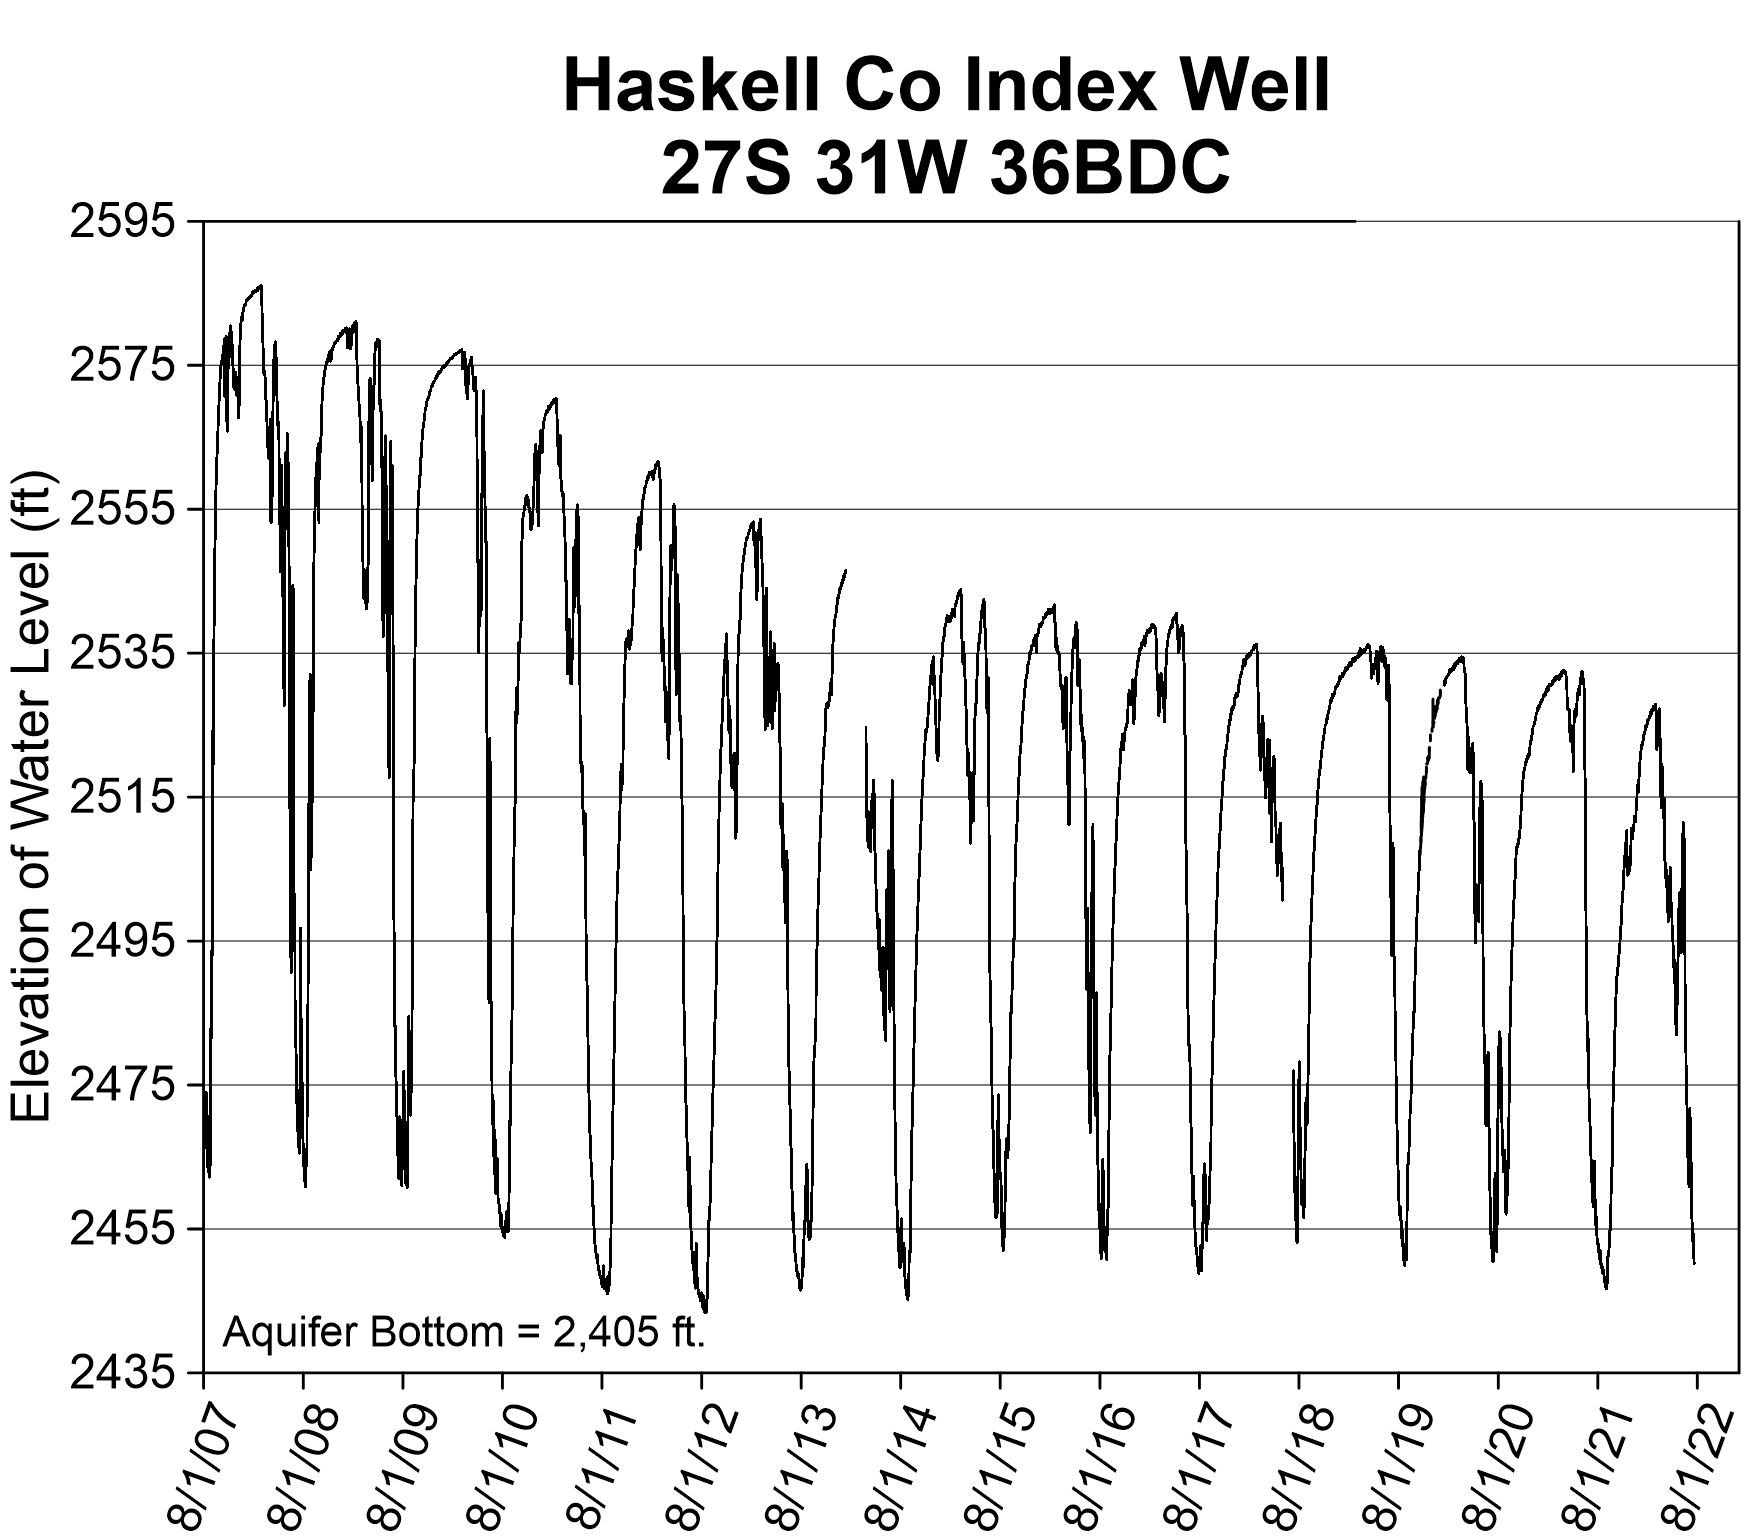 Figure 8. Hydrographs showing water-level fluctuations in index wells in Haskell county.